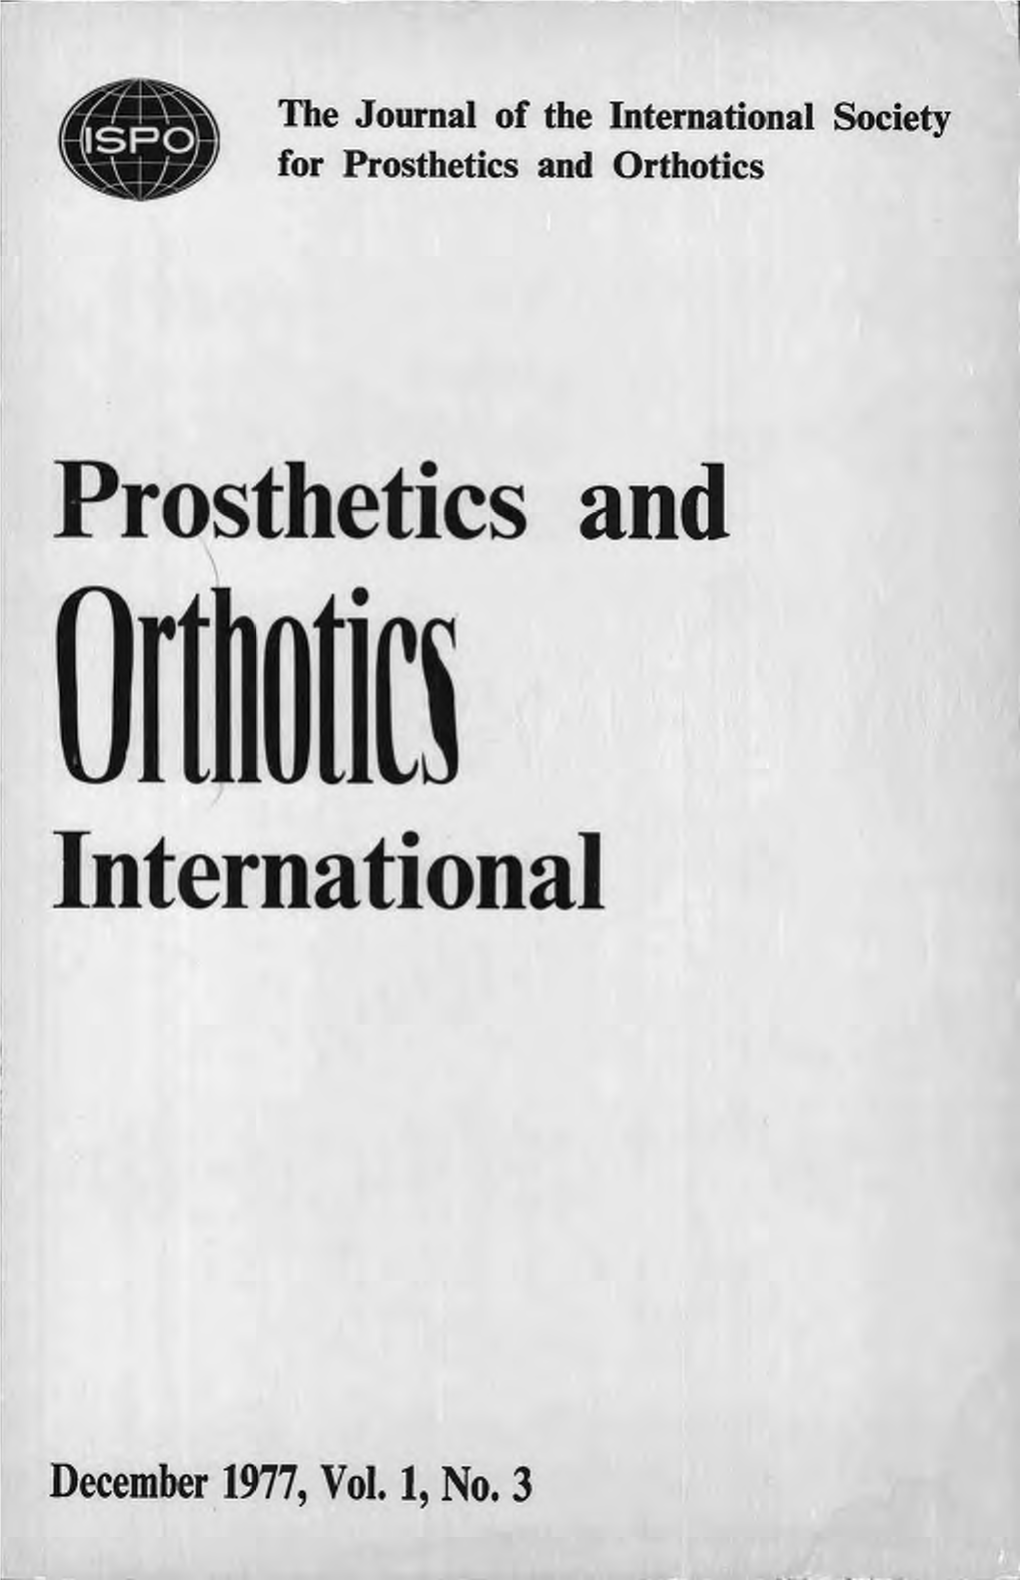 The Journal of the International Society for Prosthetics and Orthotics